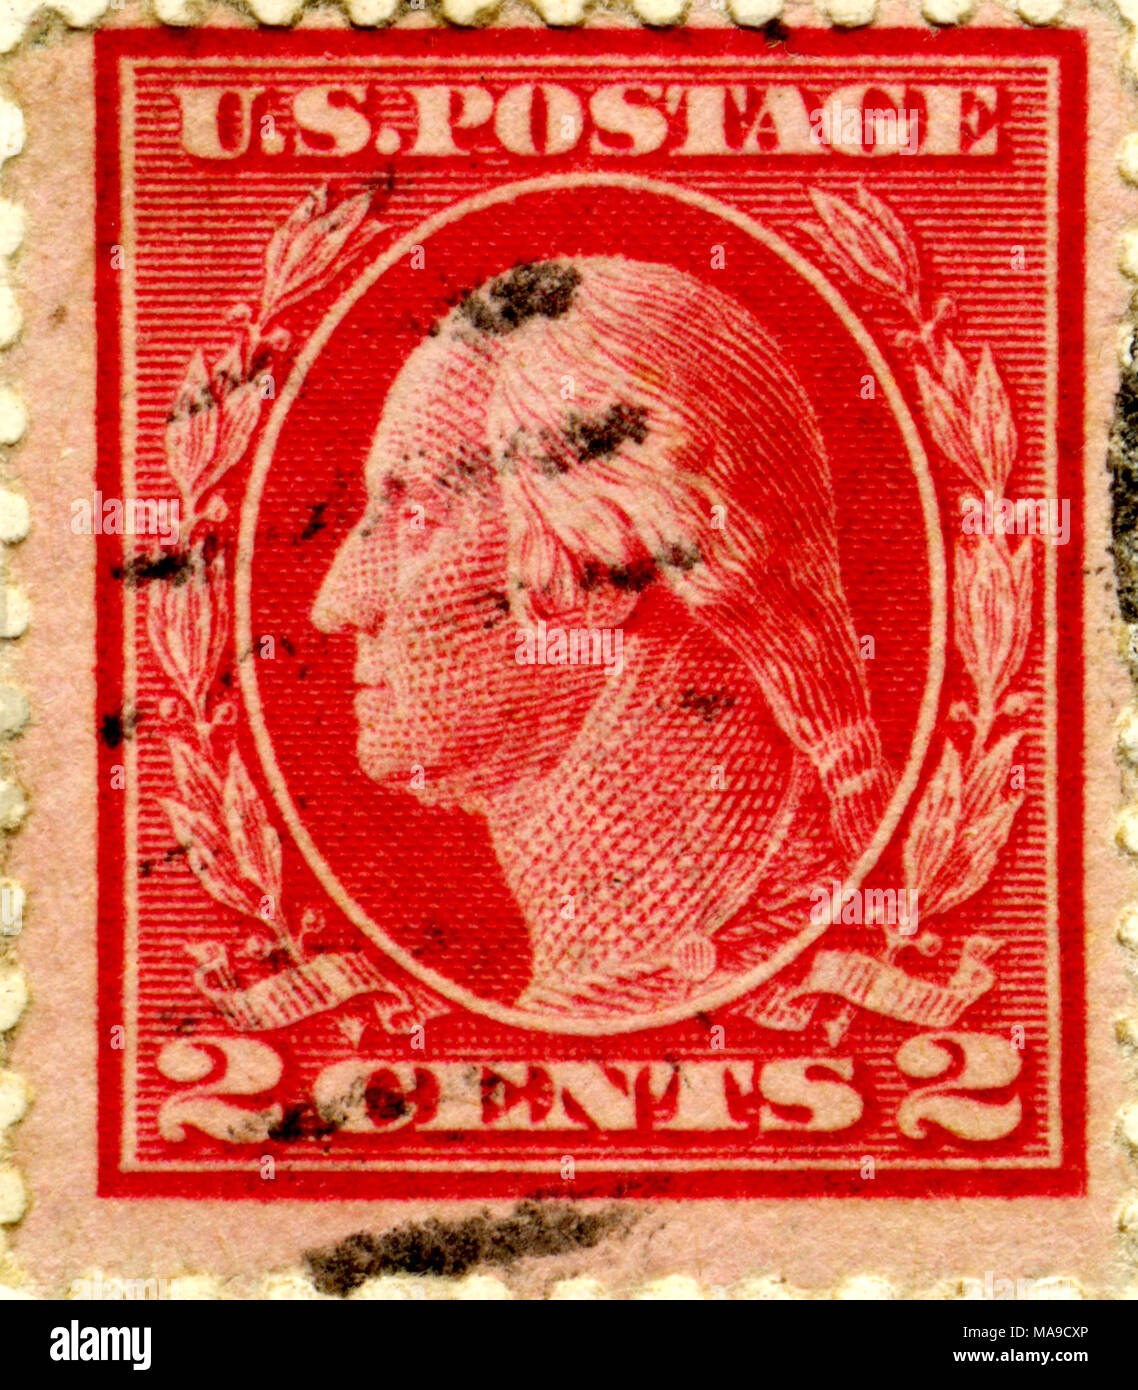 UNITED STATES OF AMERICA - CIRCA 1919: A 2 cent stamp printed in the USA shows image of President George Washington, circa 1919 Stock Photo